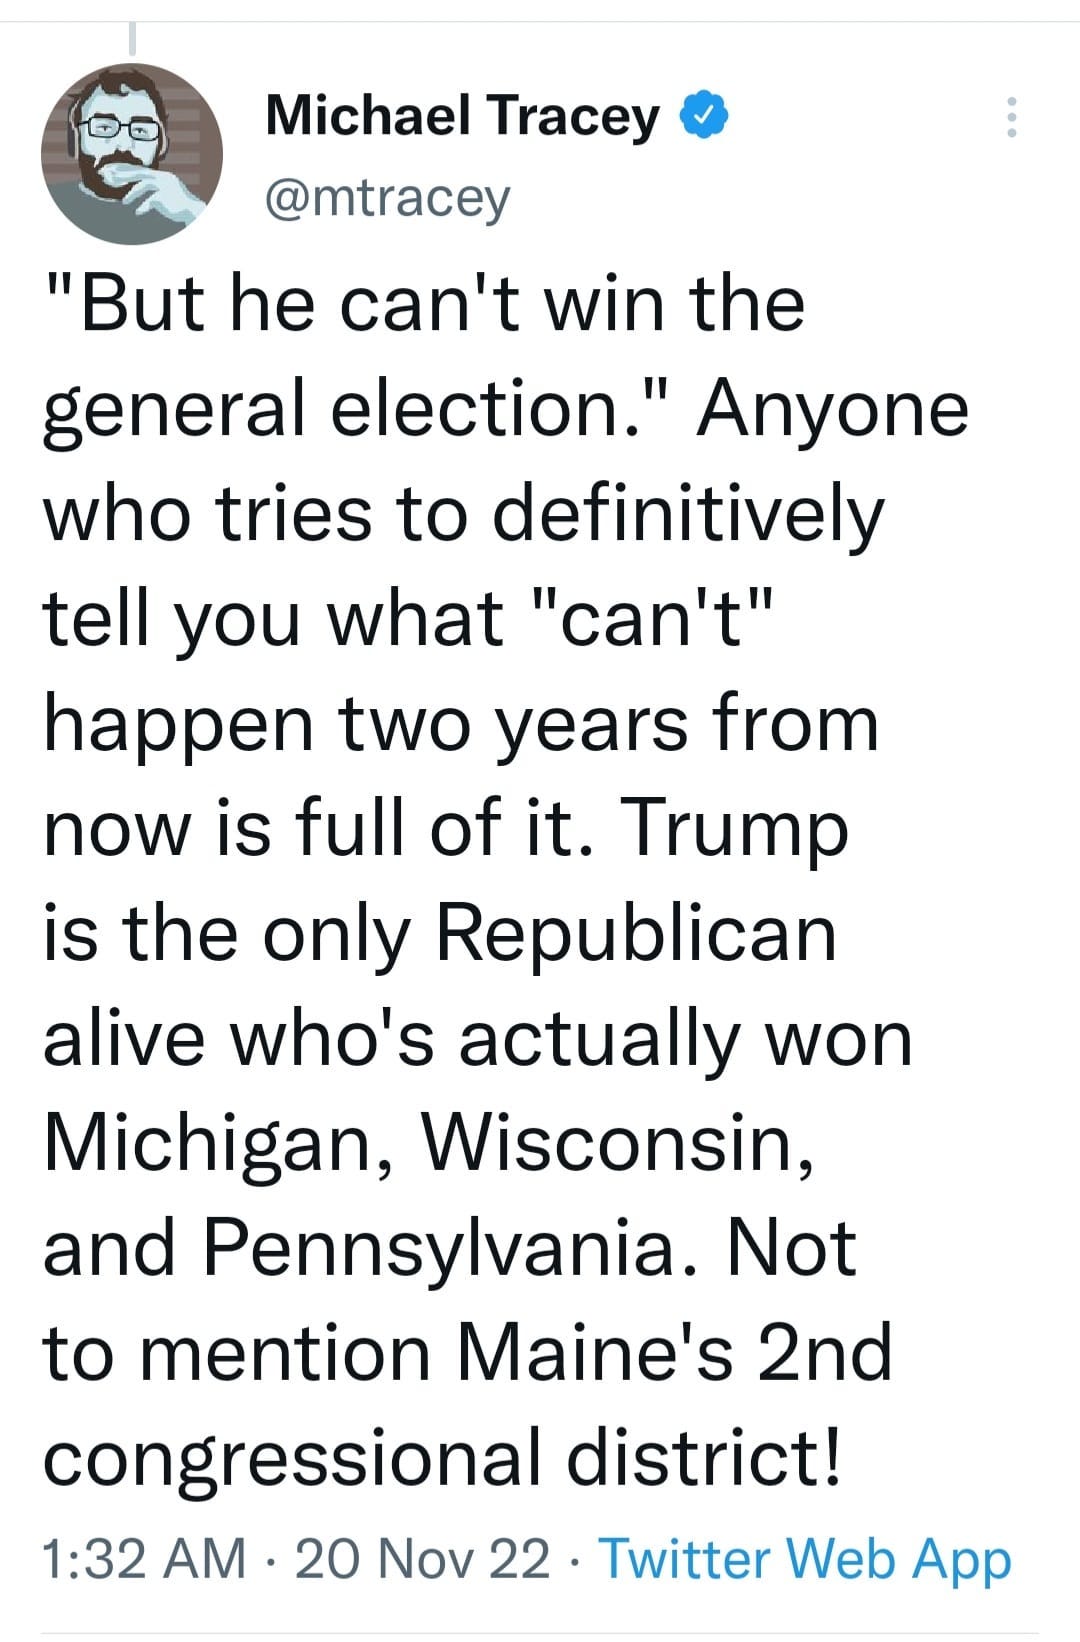 May be a Twitter screenshot of one or more people and text that says 'Michael Tracey @mtracey "But he can't win the general election." Anyone who tries to definitively tell you what "can't" happen two years from now is full of it. Trump is the only Republican alive who's actually won Michigan, Wisconsin, and Pennsylvania. Not to mention Maine's 2nd congressional district! 1:32 AM 20 Nov 22 Twitter Web App'